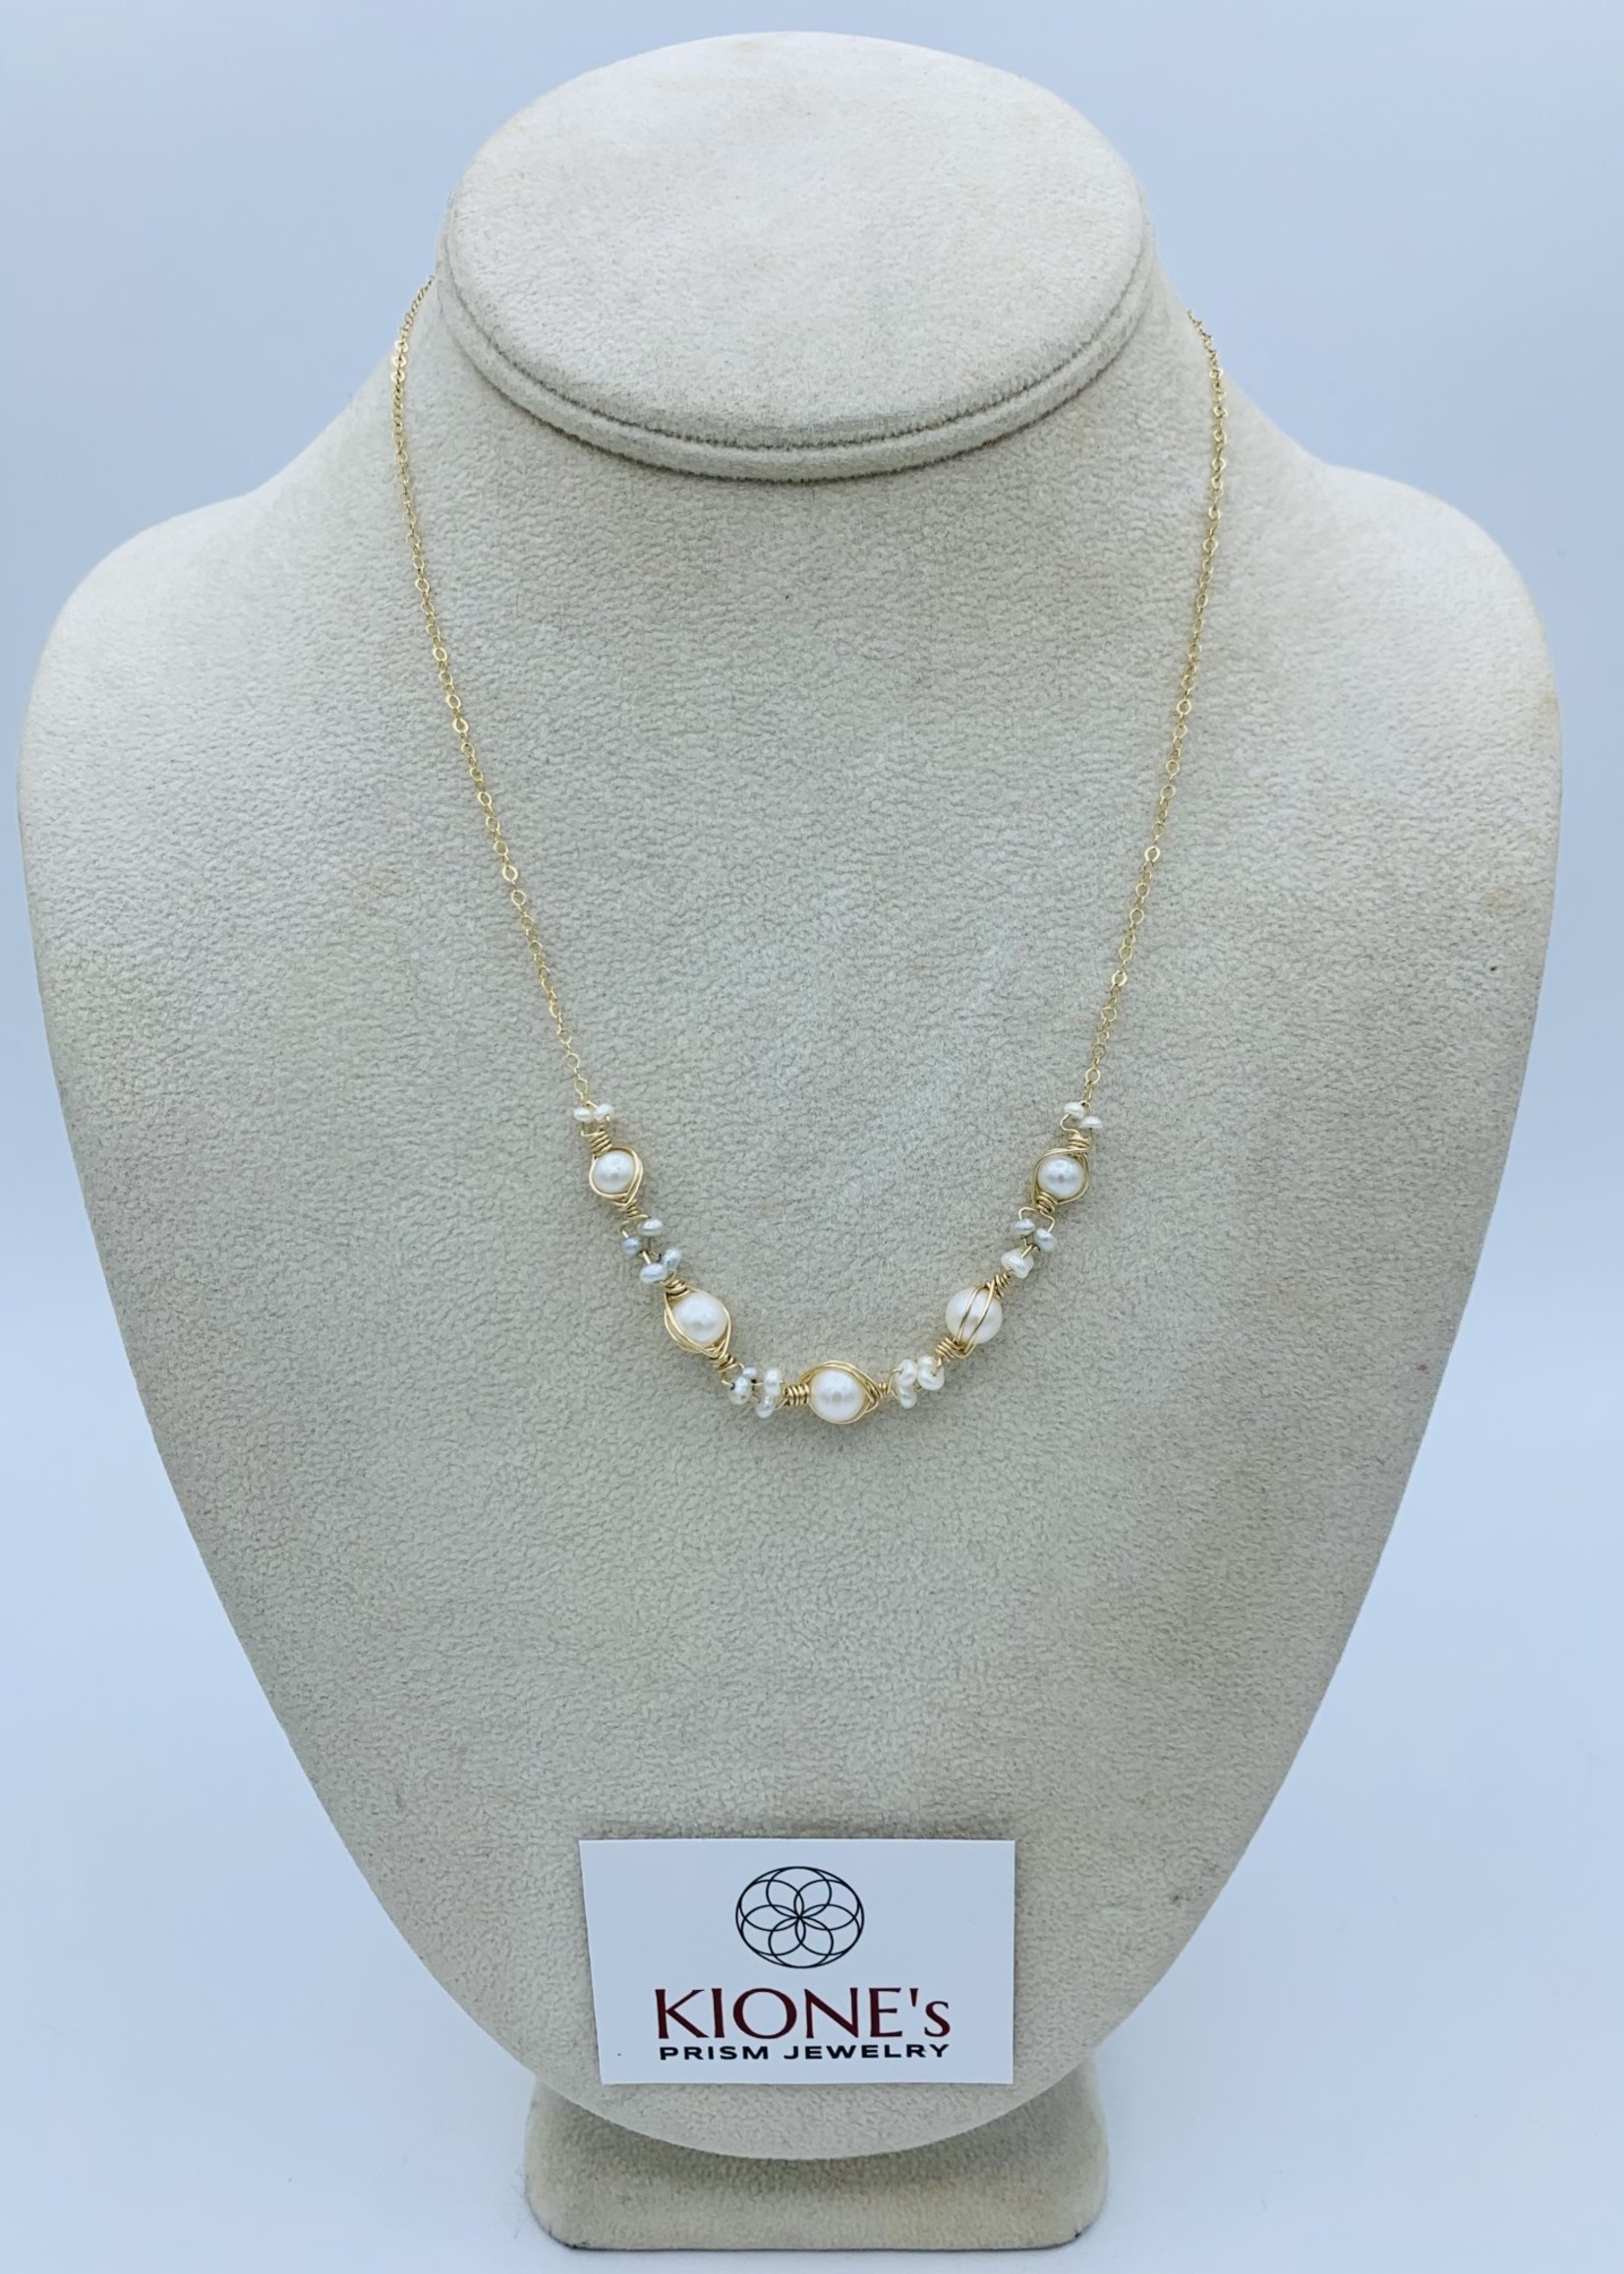 Kione’s Prism Jewelry Kione’s Classic 5 Link White Fresh Water Pearl on Yellow Gold Necklace